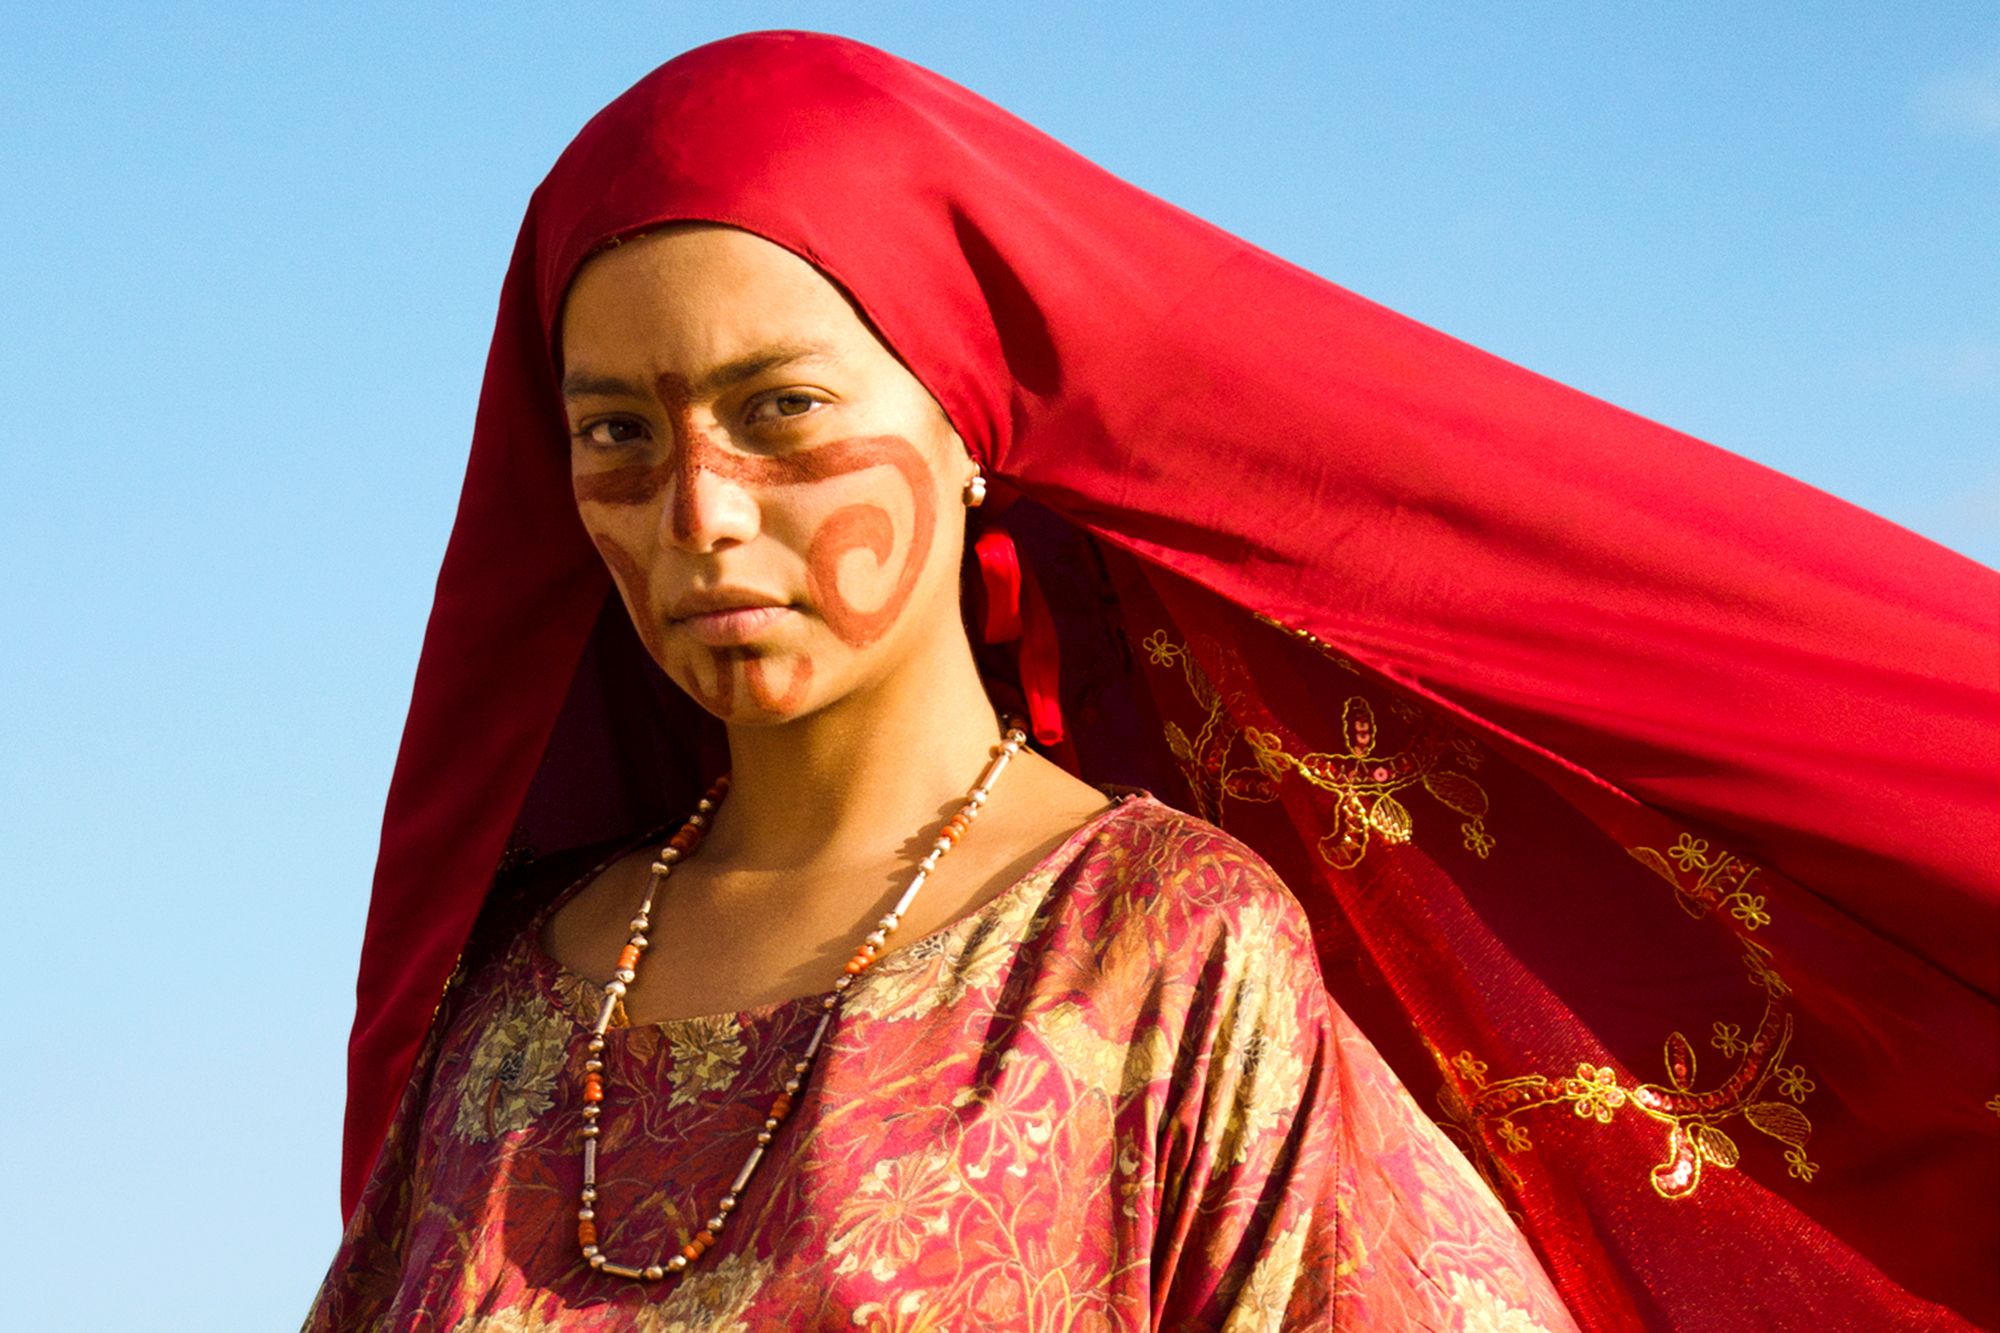 Birds of Passage: Co-Directors Cristina Gallego and Ciro Guerra On Columbian Drug Trade [Exclusive Interview]